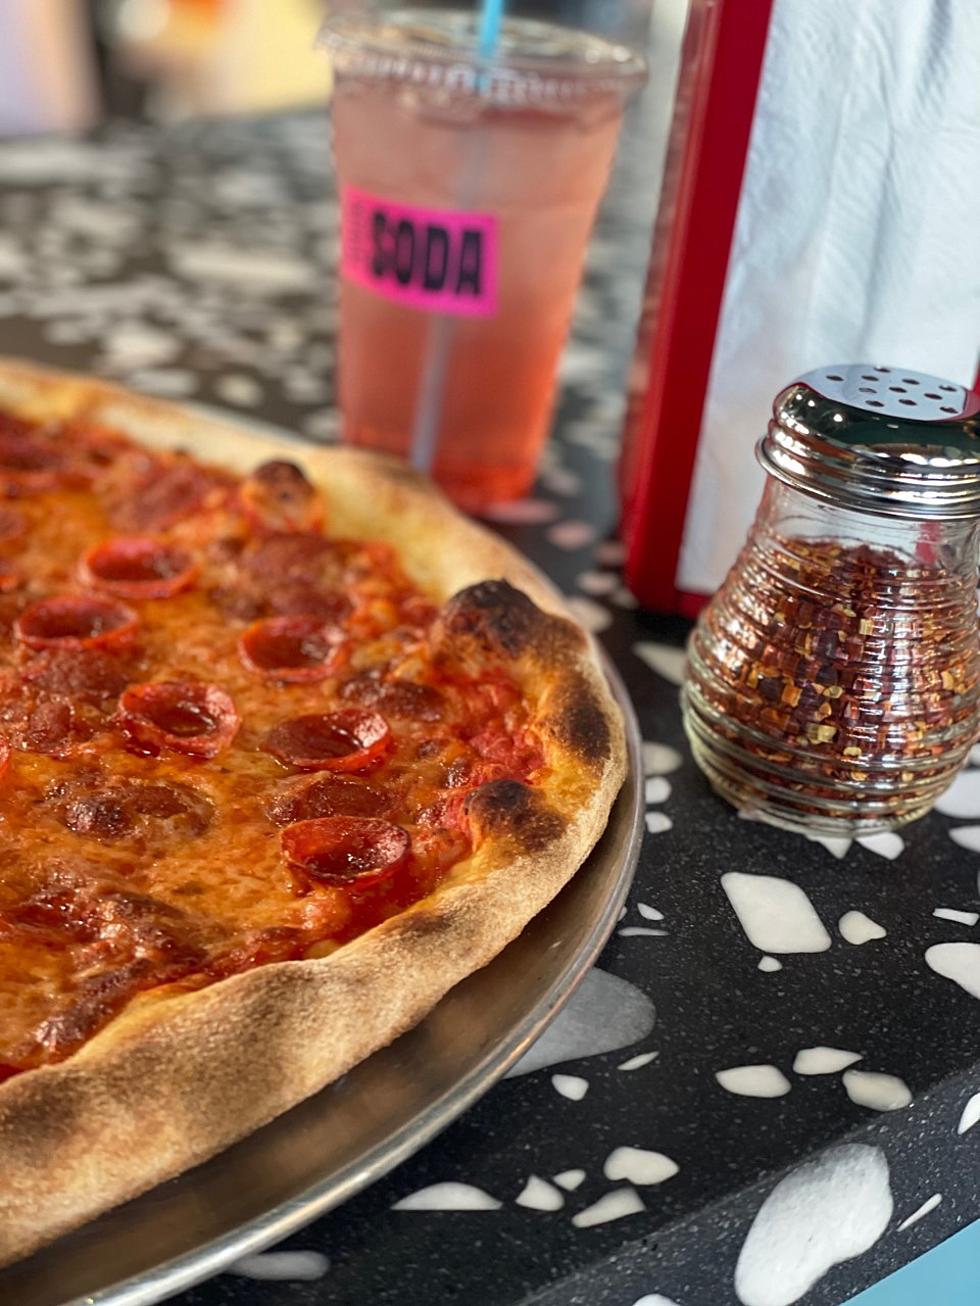 Asbury Park, NJ Welcomes Pizzeria With New York-Style Pizza & Homemade Soda